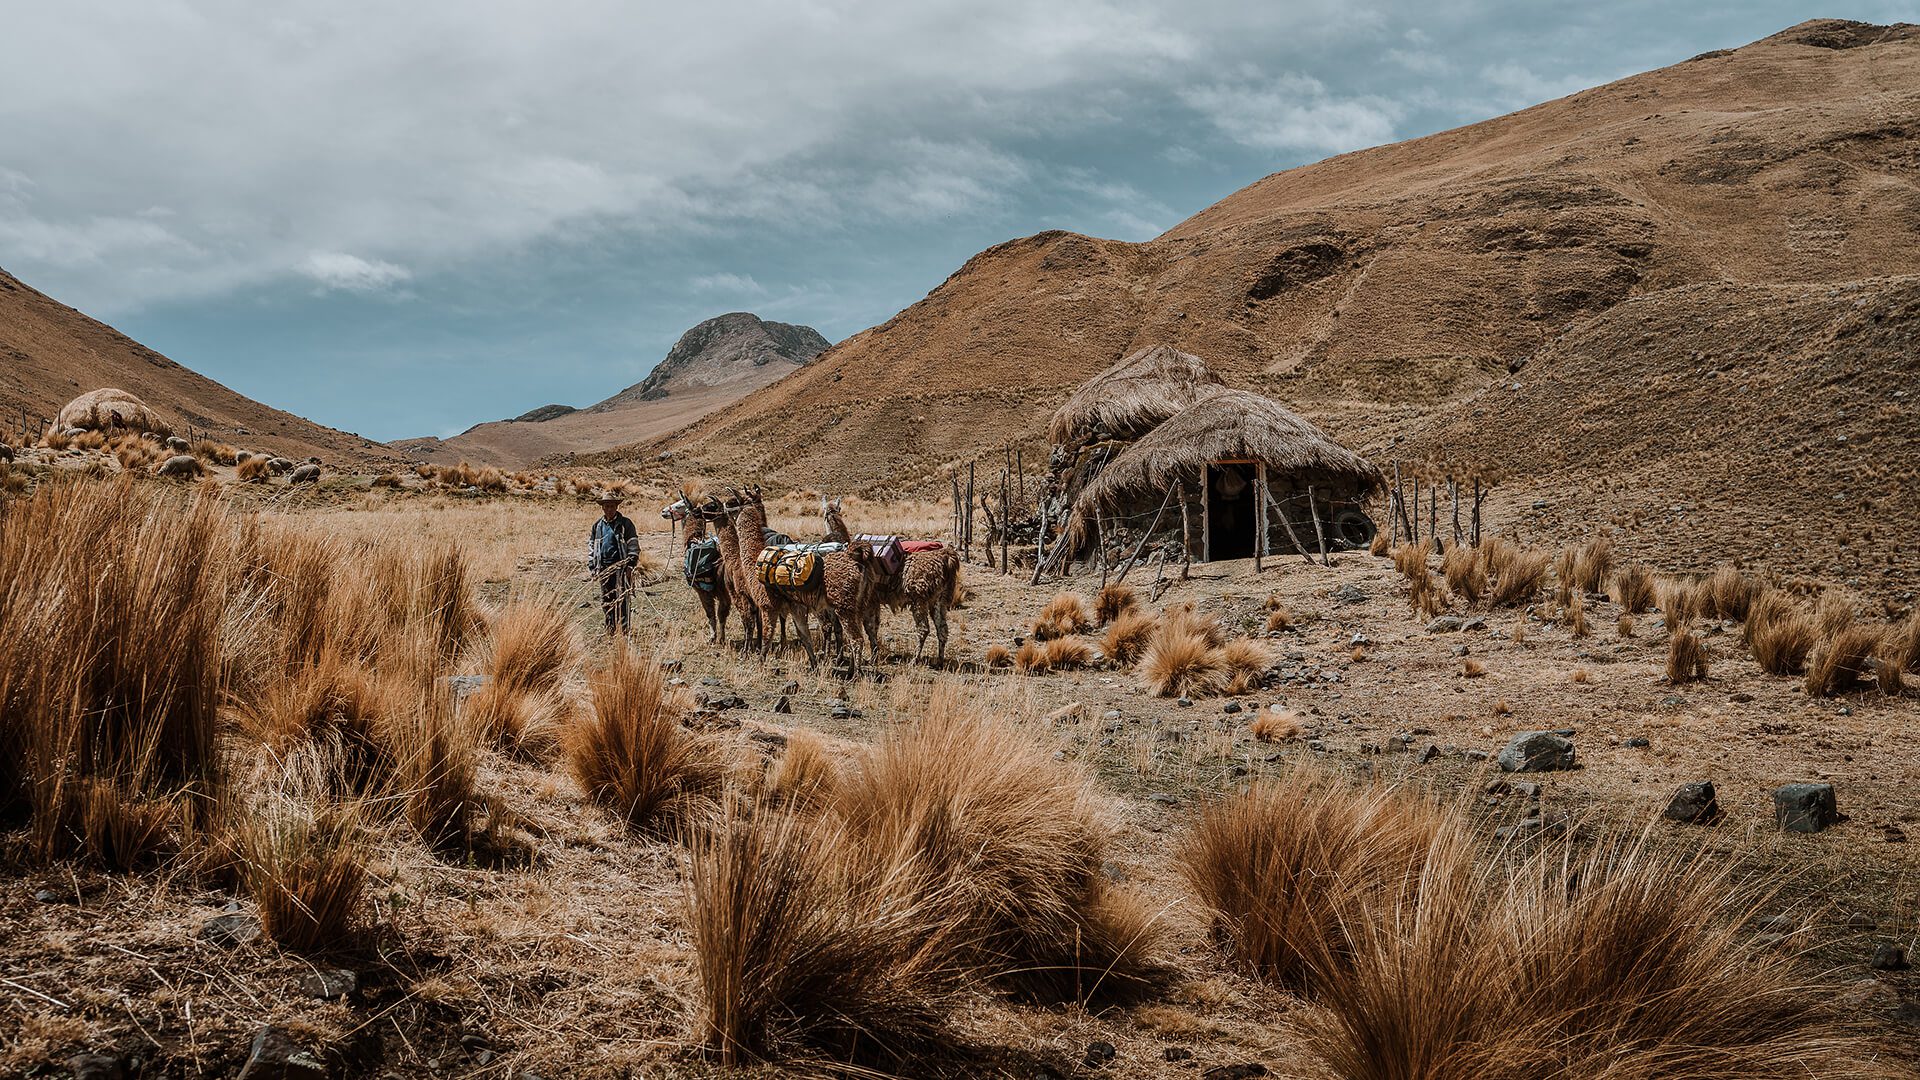 Man and llamas next to Choza huts in the Andes | Llama Trek Olleros to Chavin with RESPONSible Travel Peru | Photo by Bjorn Snelders